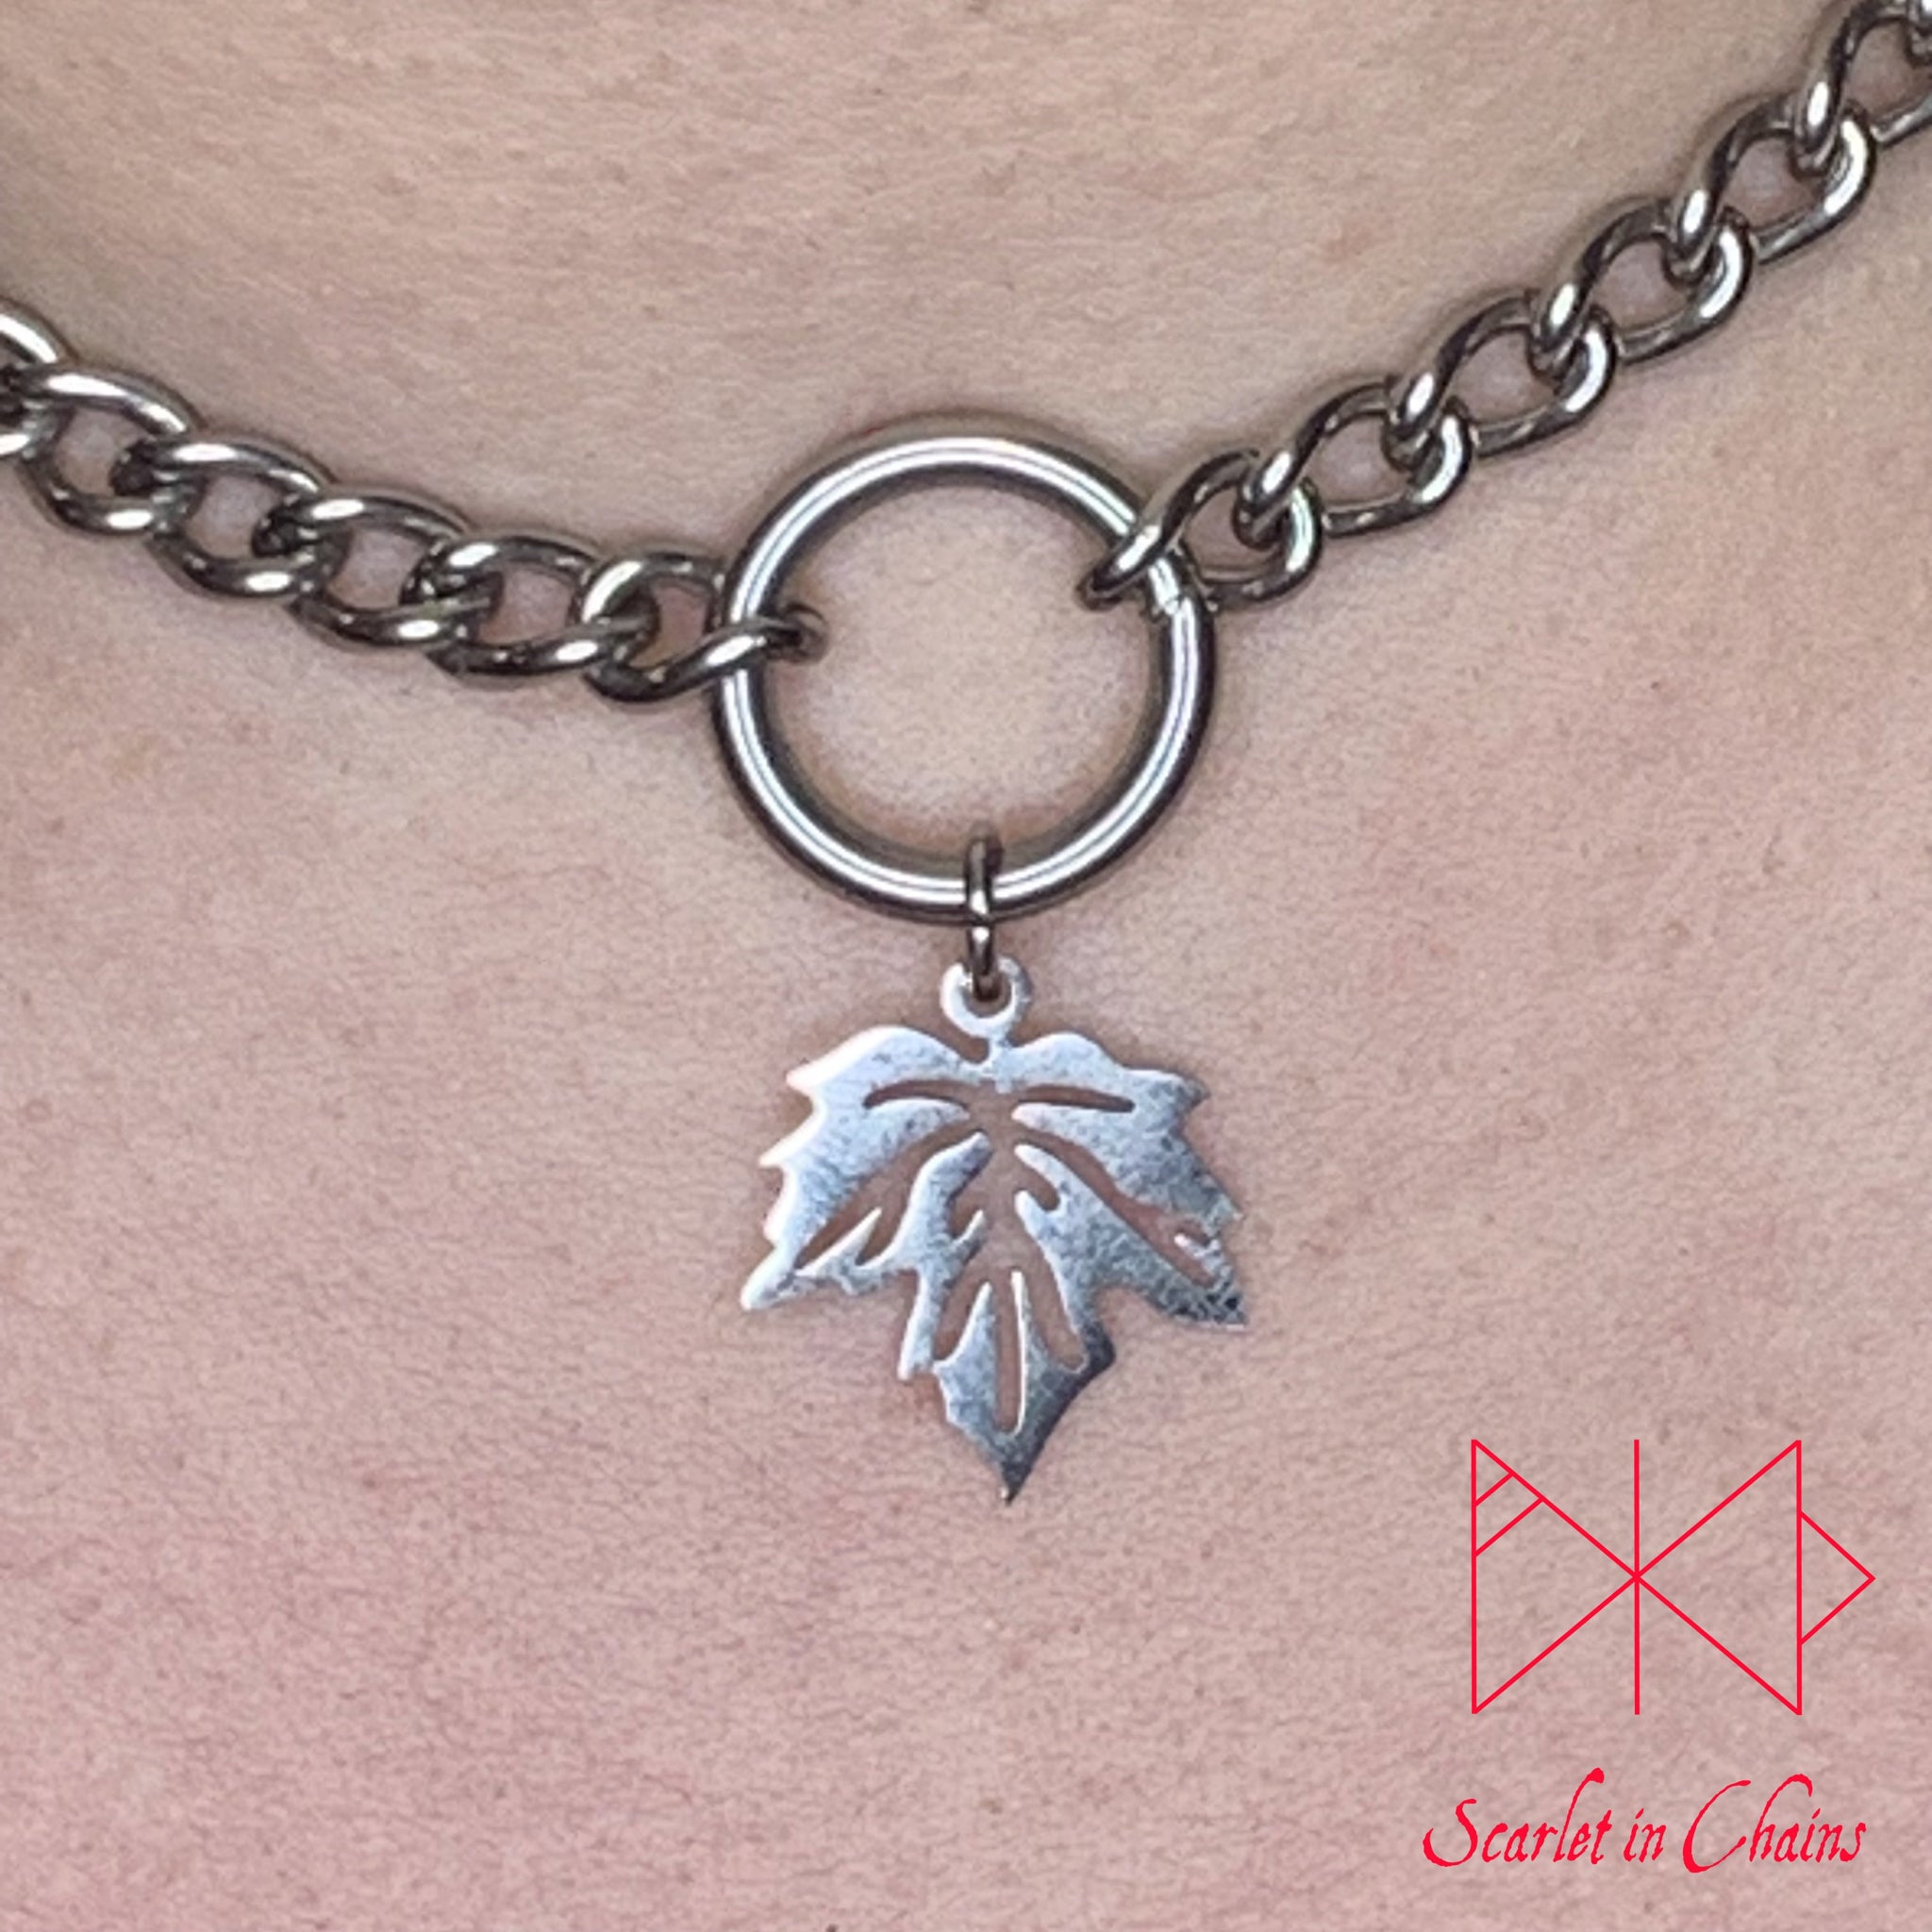 Stainless Steel Leaf charm necklace - Witch Necklace - Bdsm Day collar - O ring choker - O ring collar - Goth Choker - Fetish - Witchy Choker - Day Collar shown close